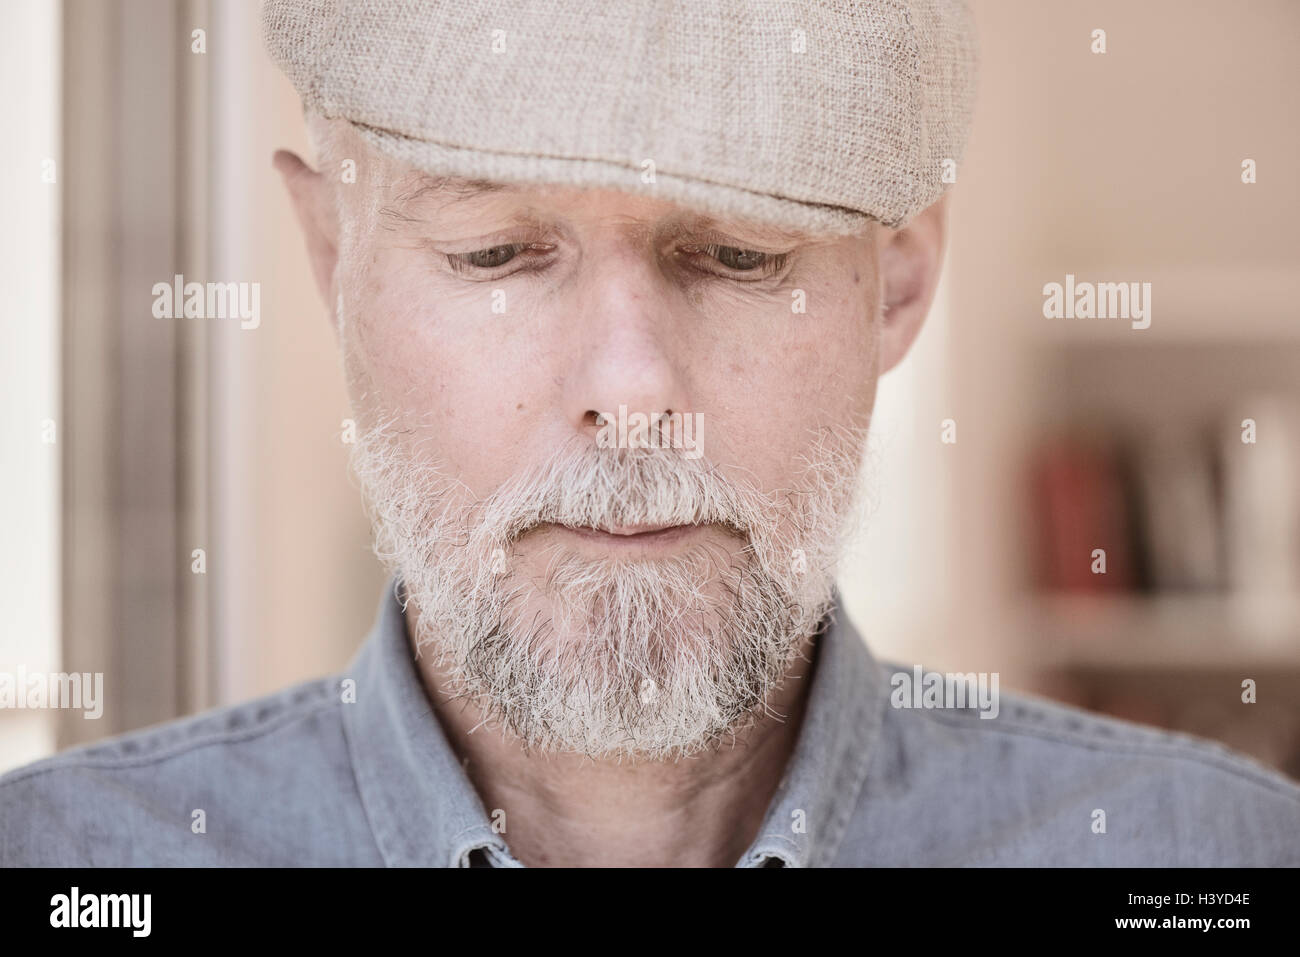 Portrait of old man looking down. Serious and pensive facial expression. Stock Photo